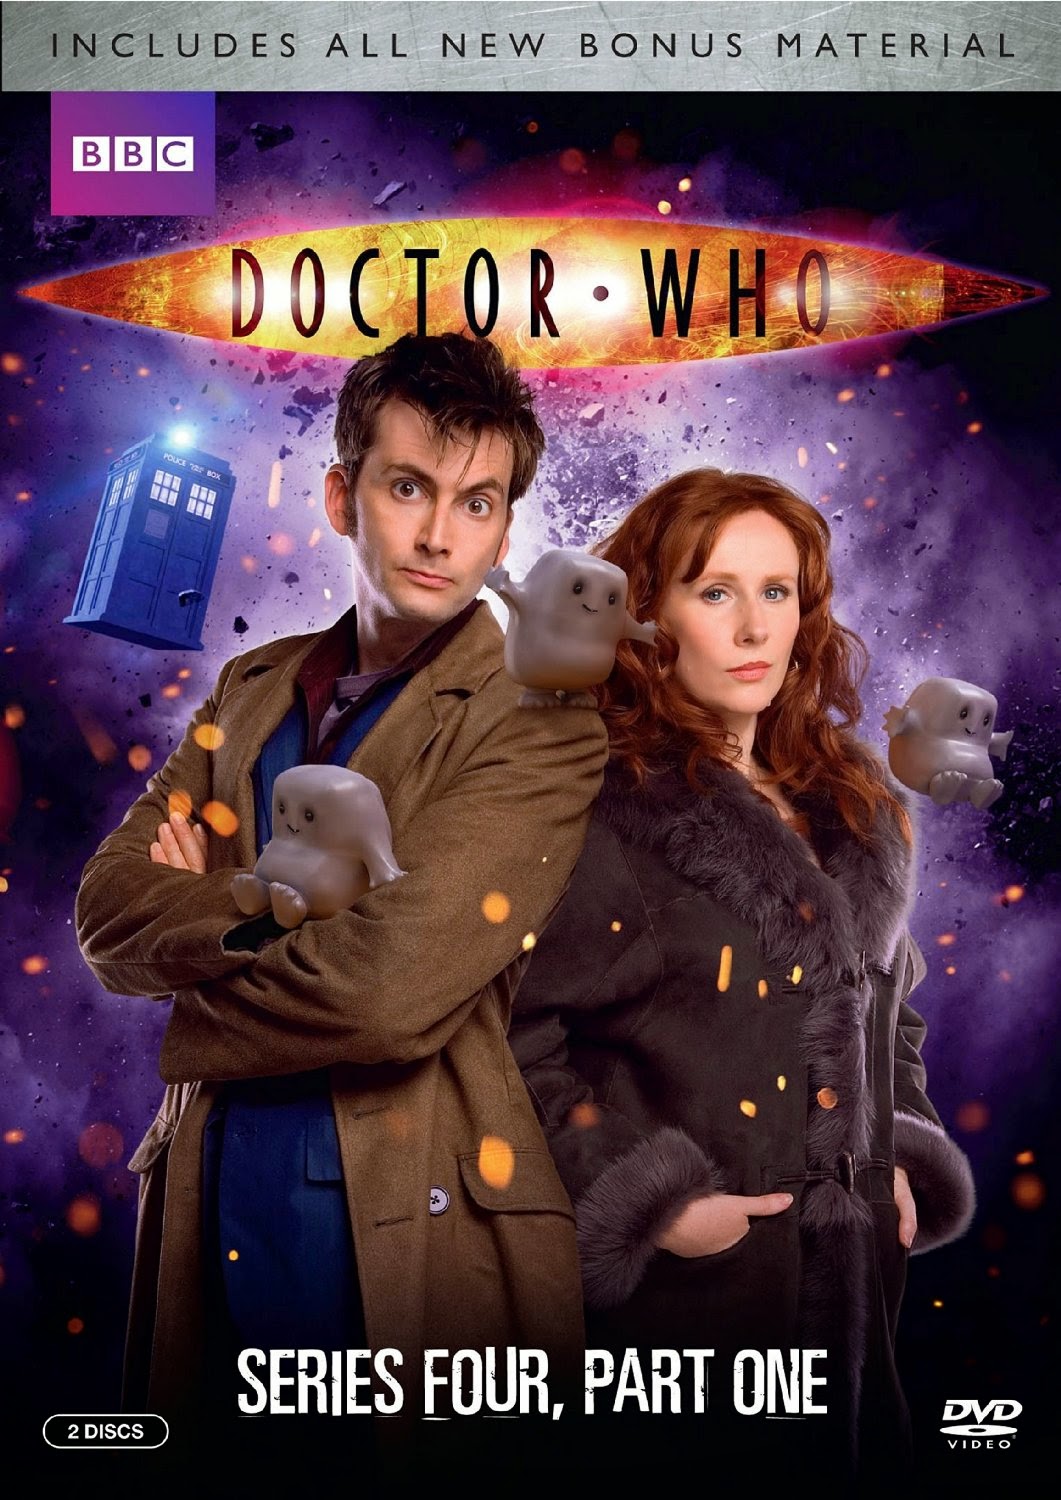 USA PRE ORDER: Art Work For Doctor Who: Series Four - Part Two Revealed